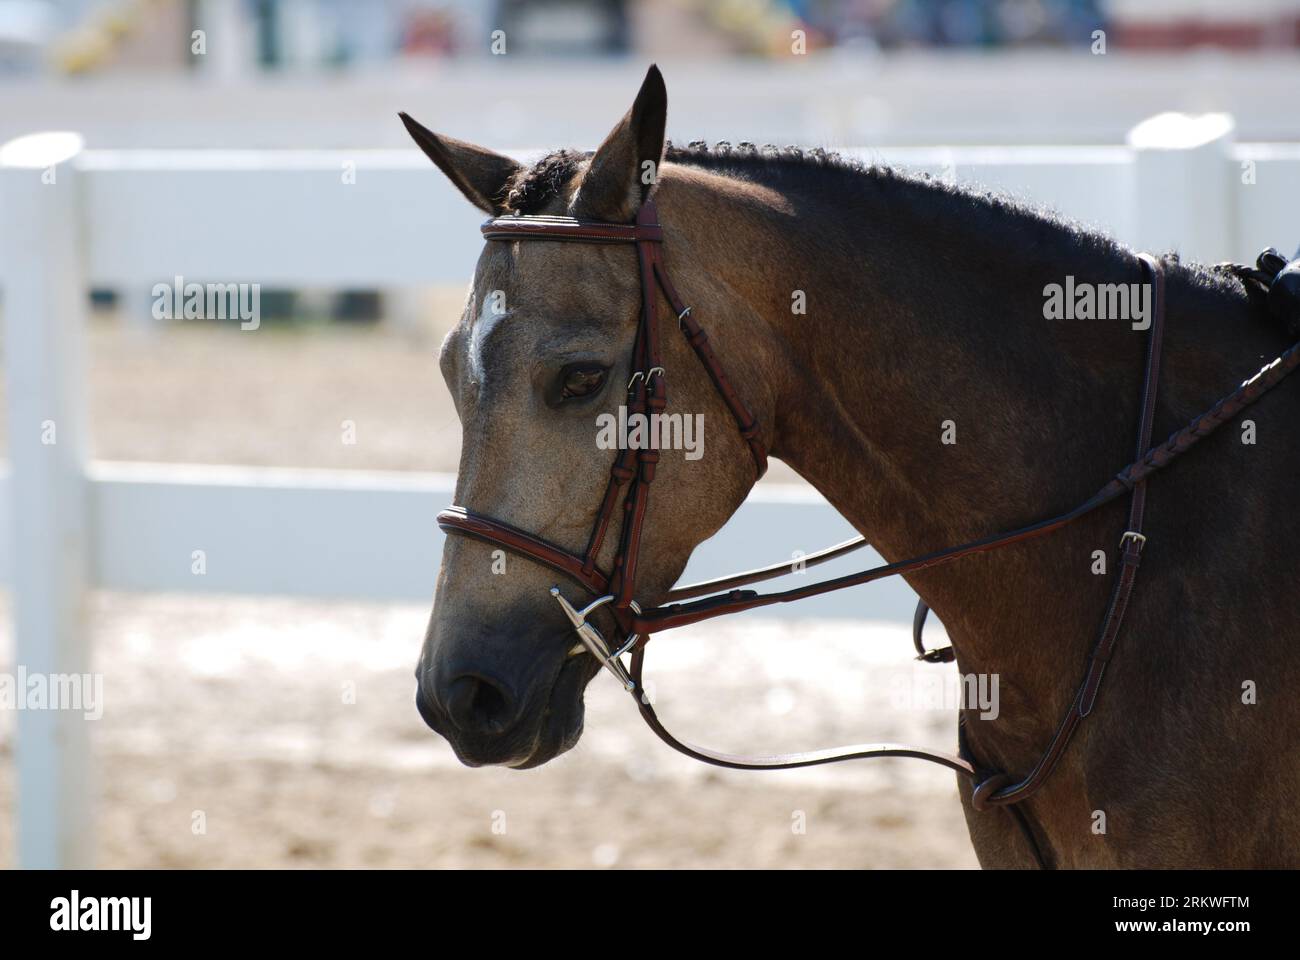 Beautiful sweet roan pony in the show ring during the summer. Stock Photo